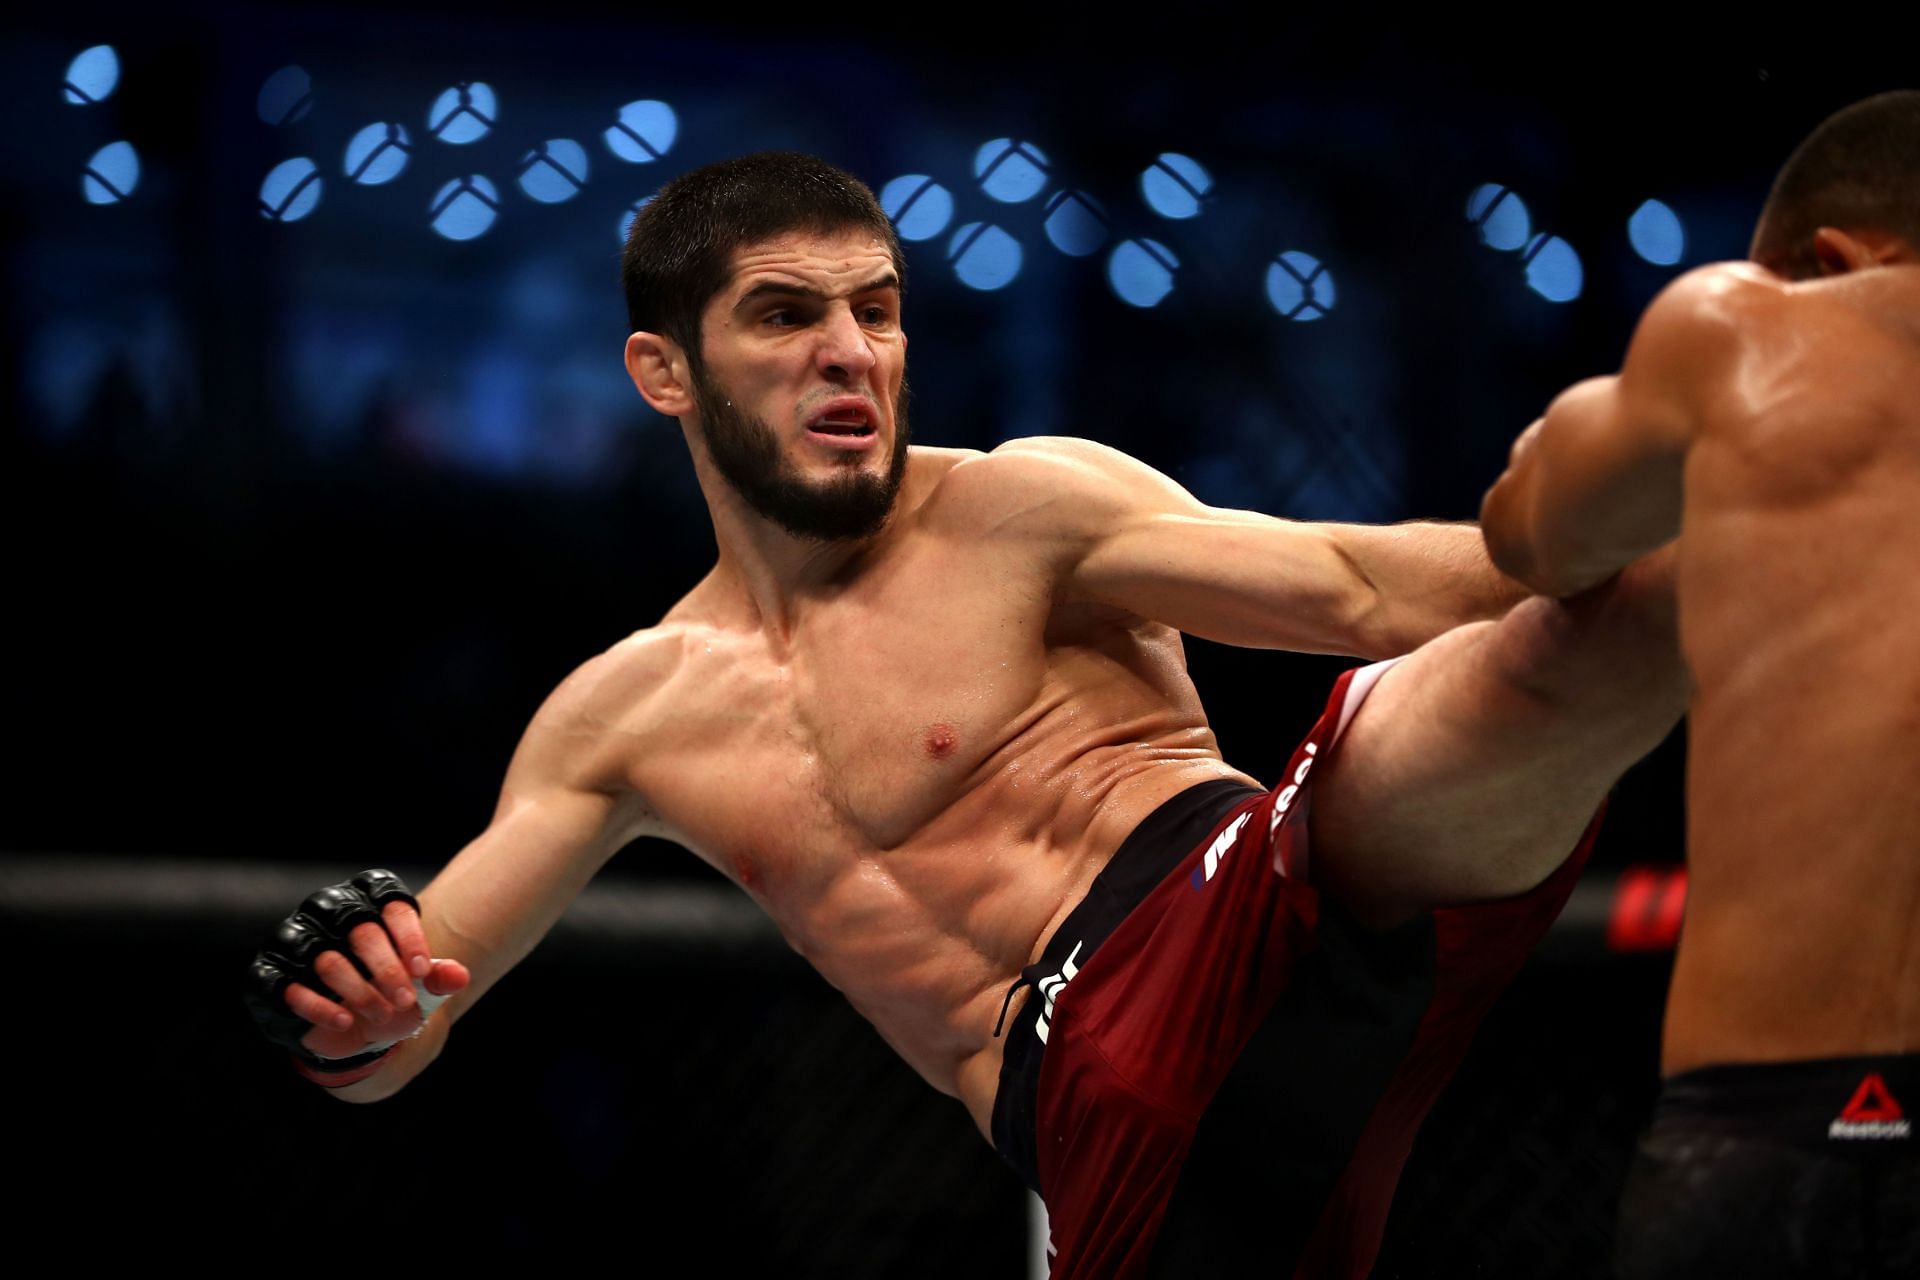 Islam Makhachev would probably jump at the chance to take on Conor McGregor